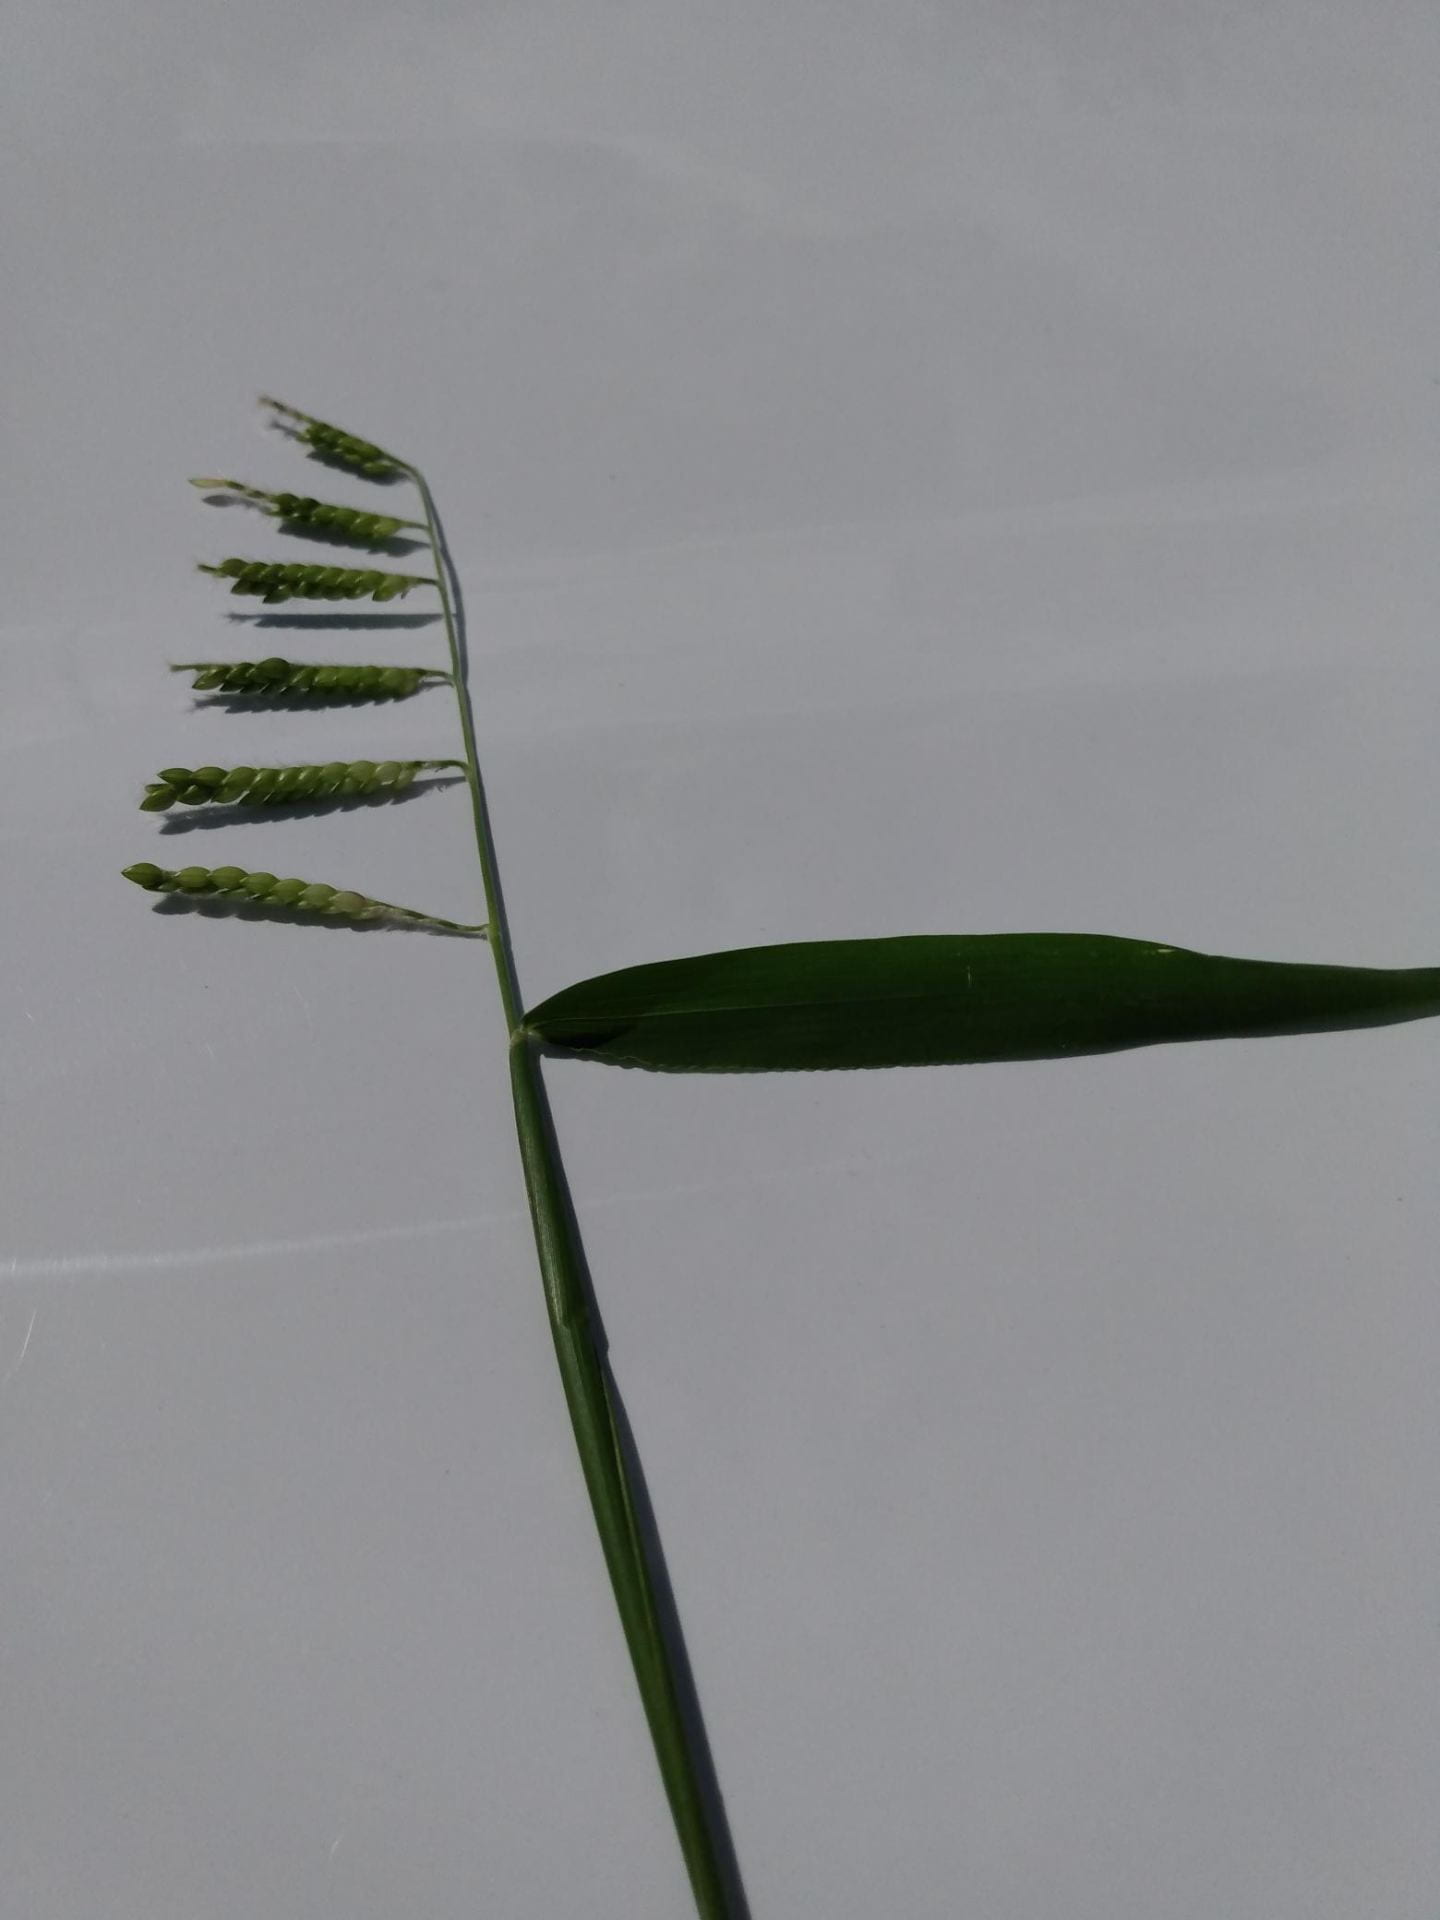 Woolly cupgrass flowering stem. Photo by Mike Hunter of Cornell Cooperative Extension.